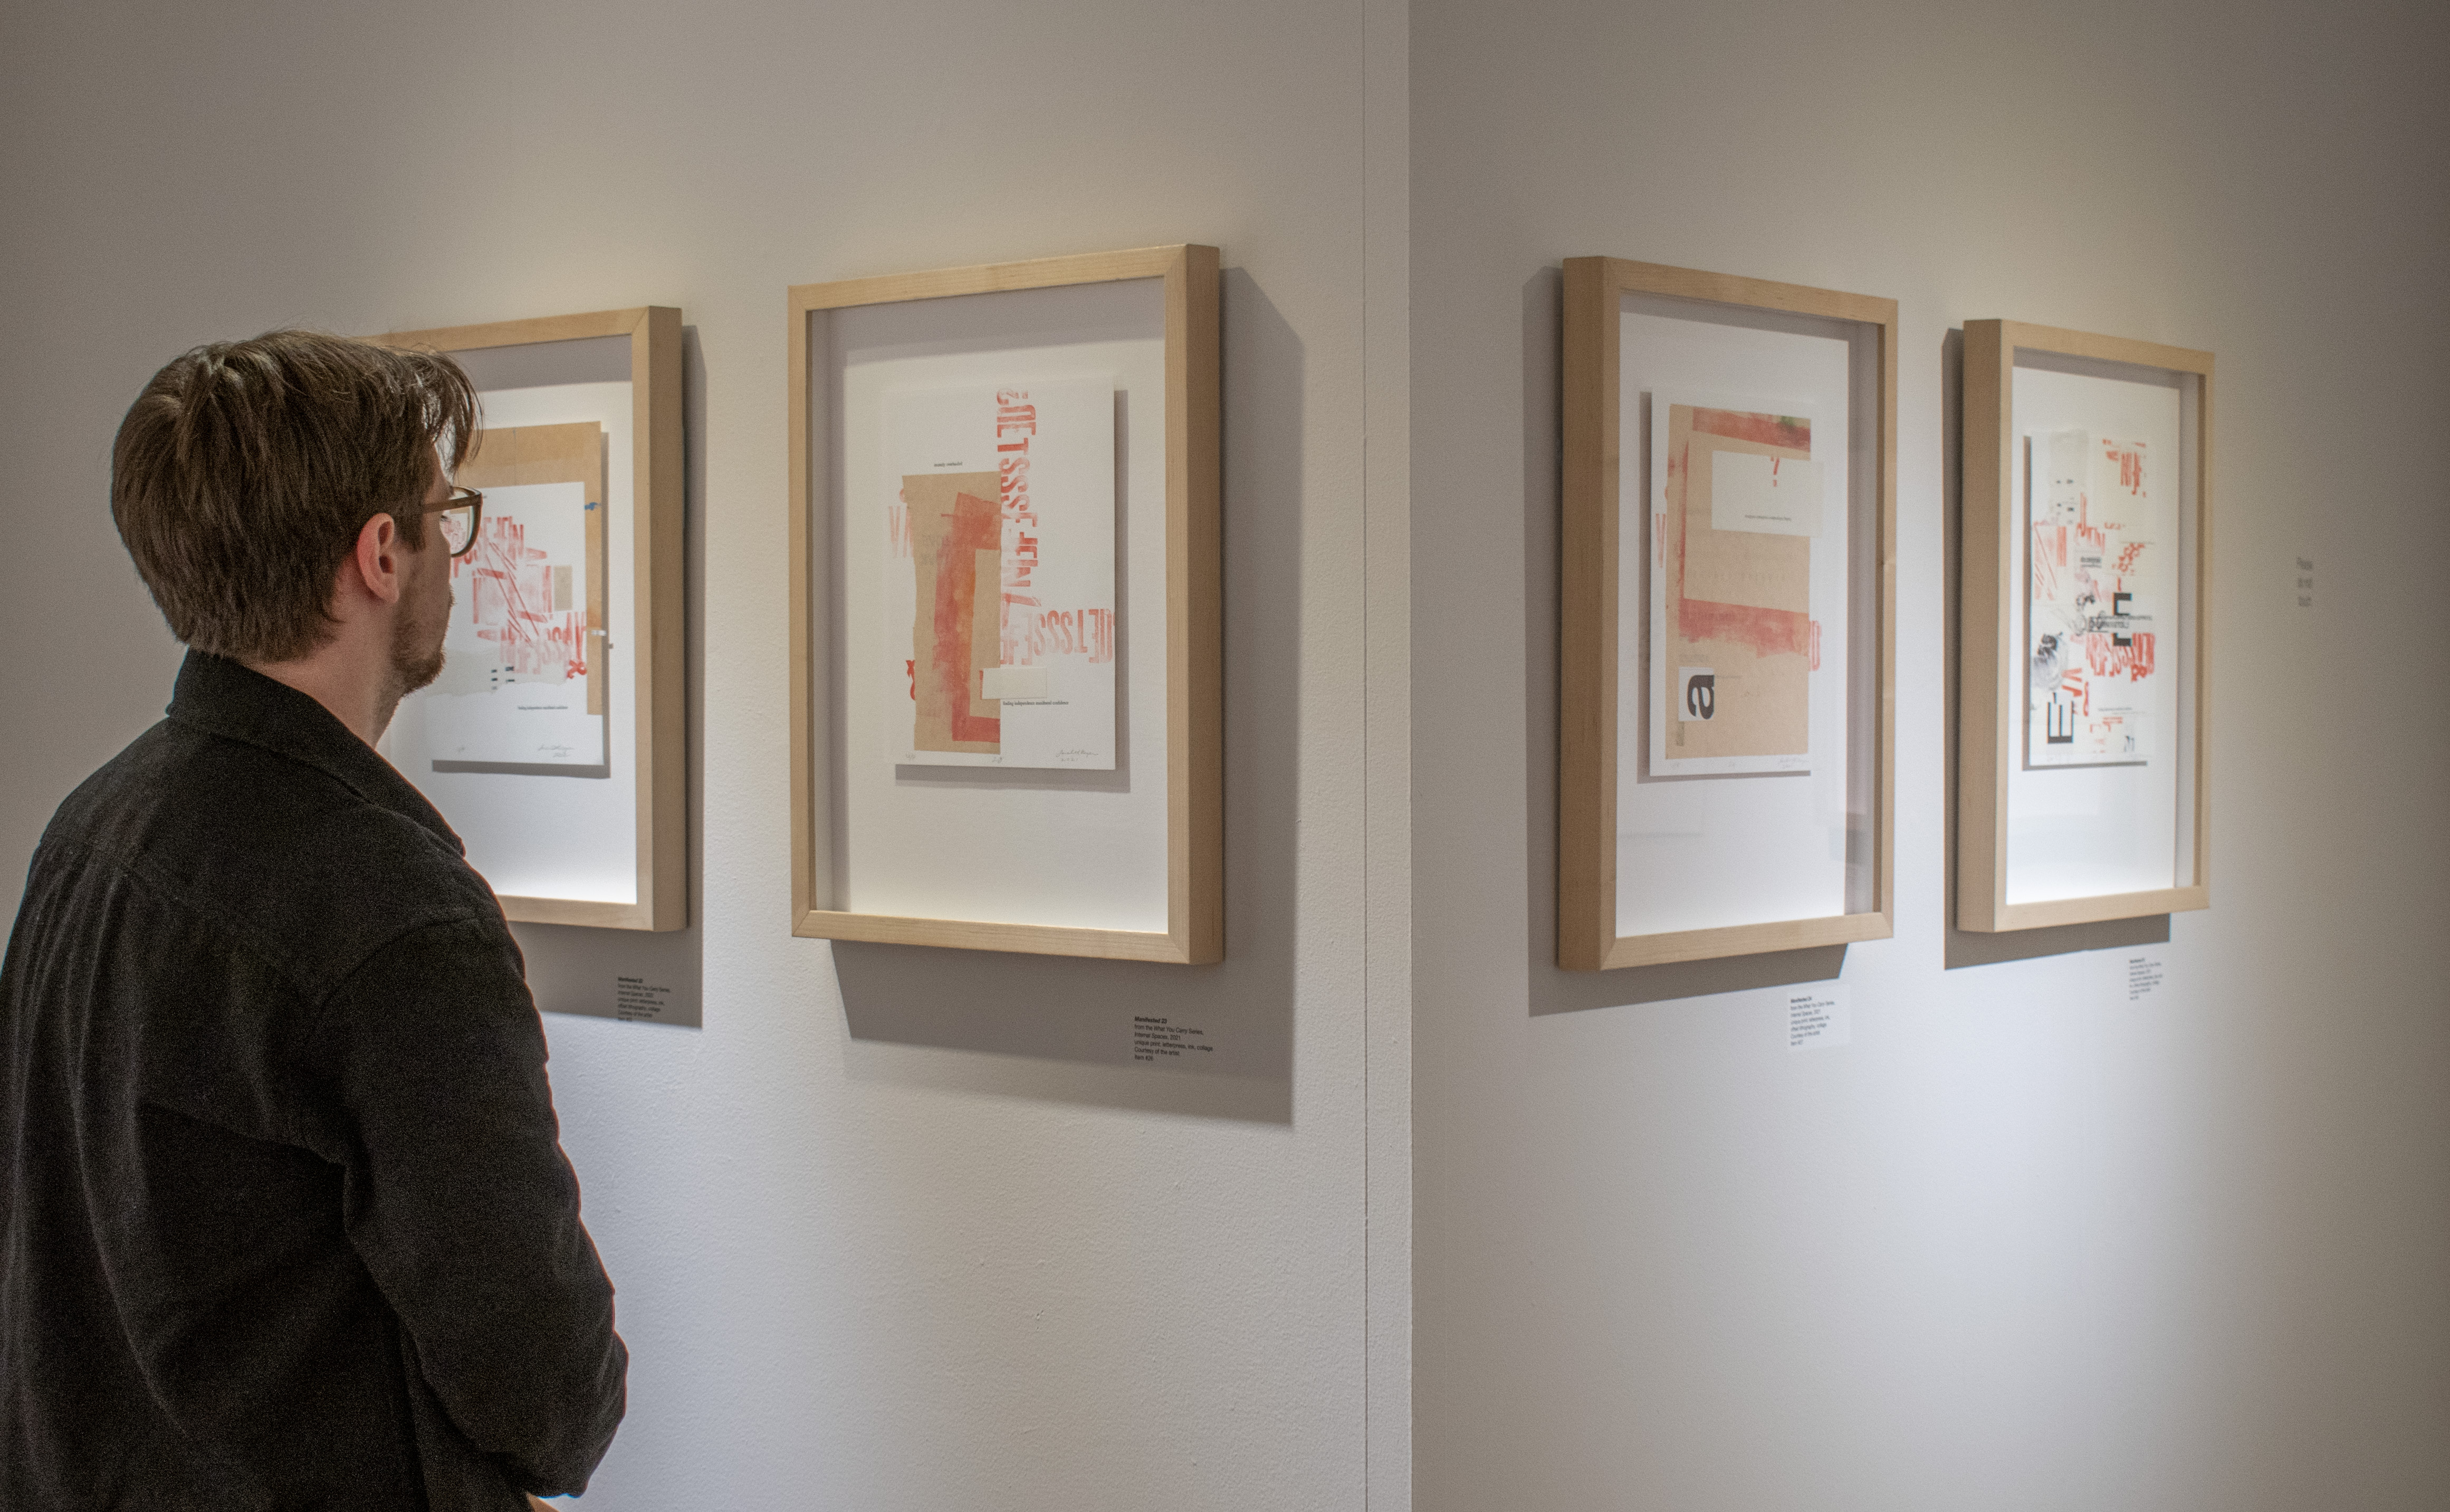 A photograph showing a gallery guest looking at the displayed pieces